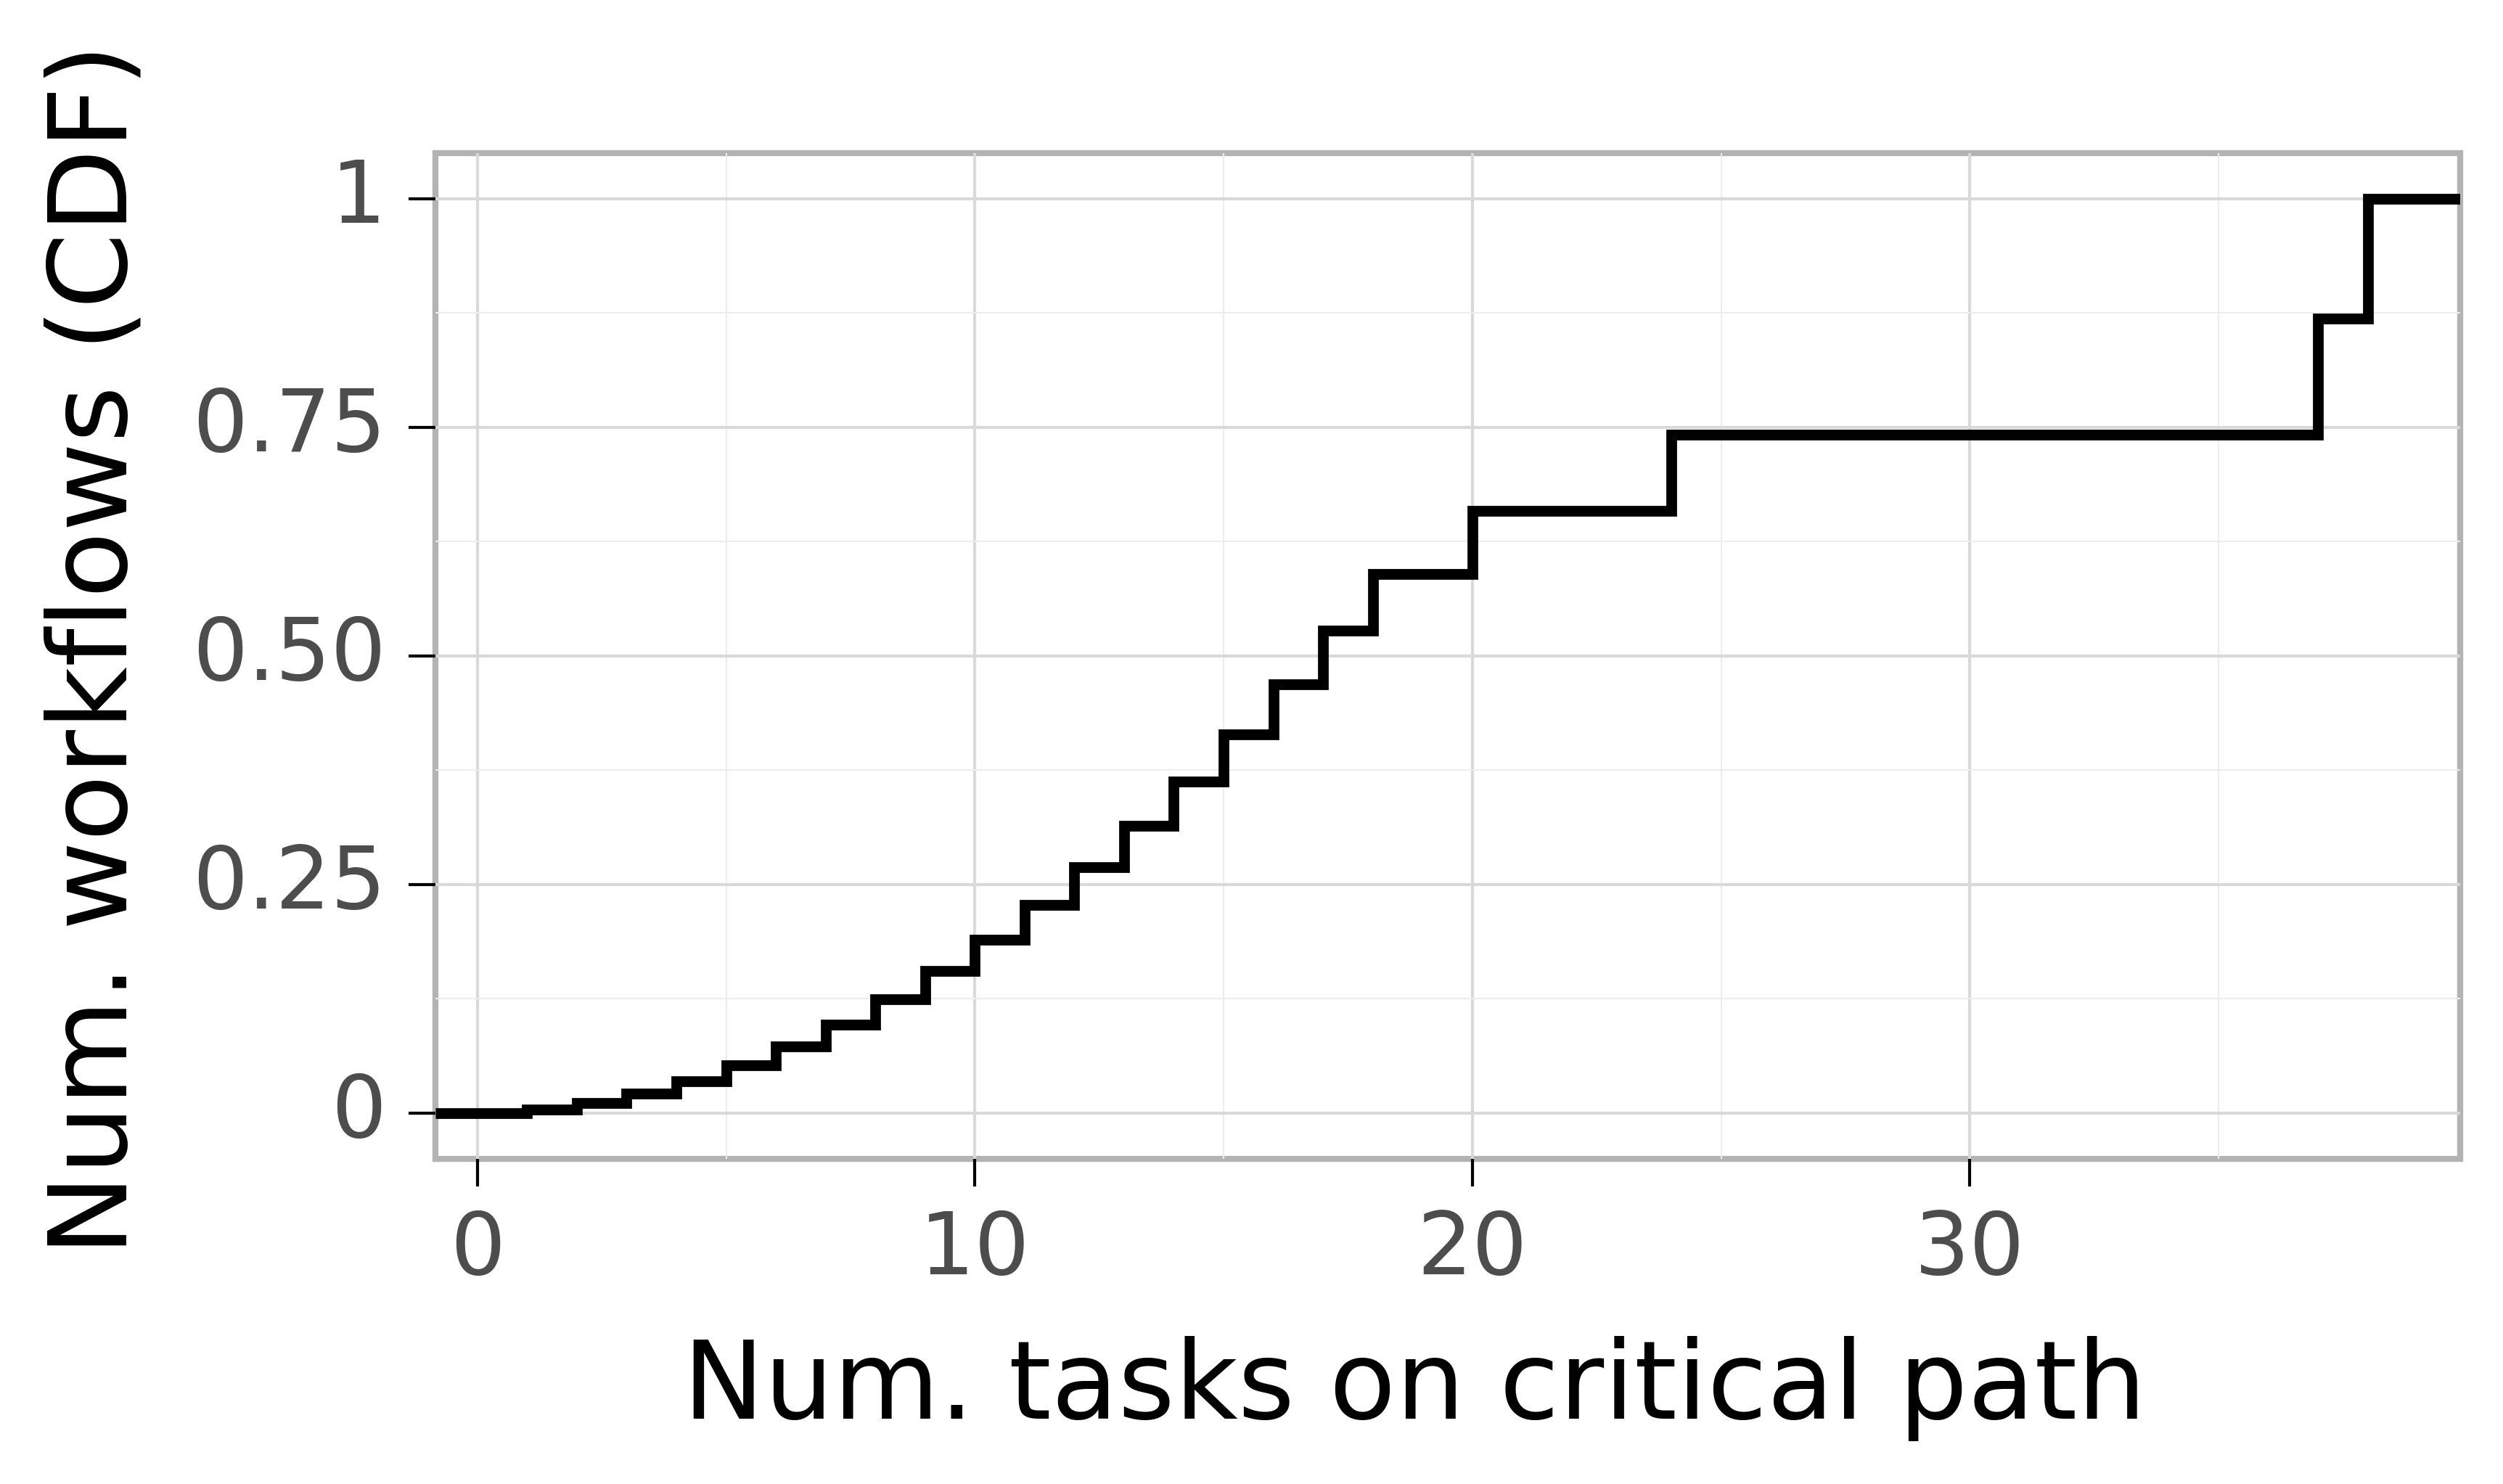 Job critical path task count graph for the Galaxy trace.